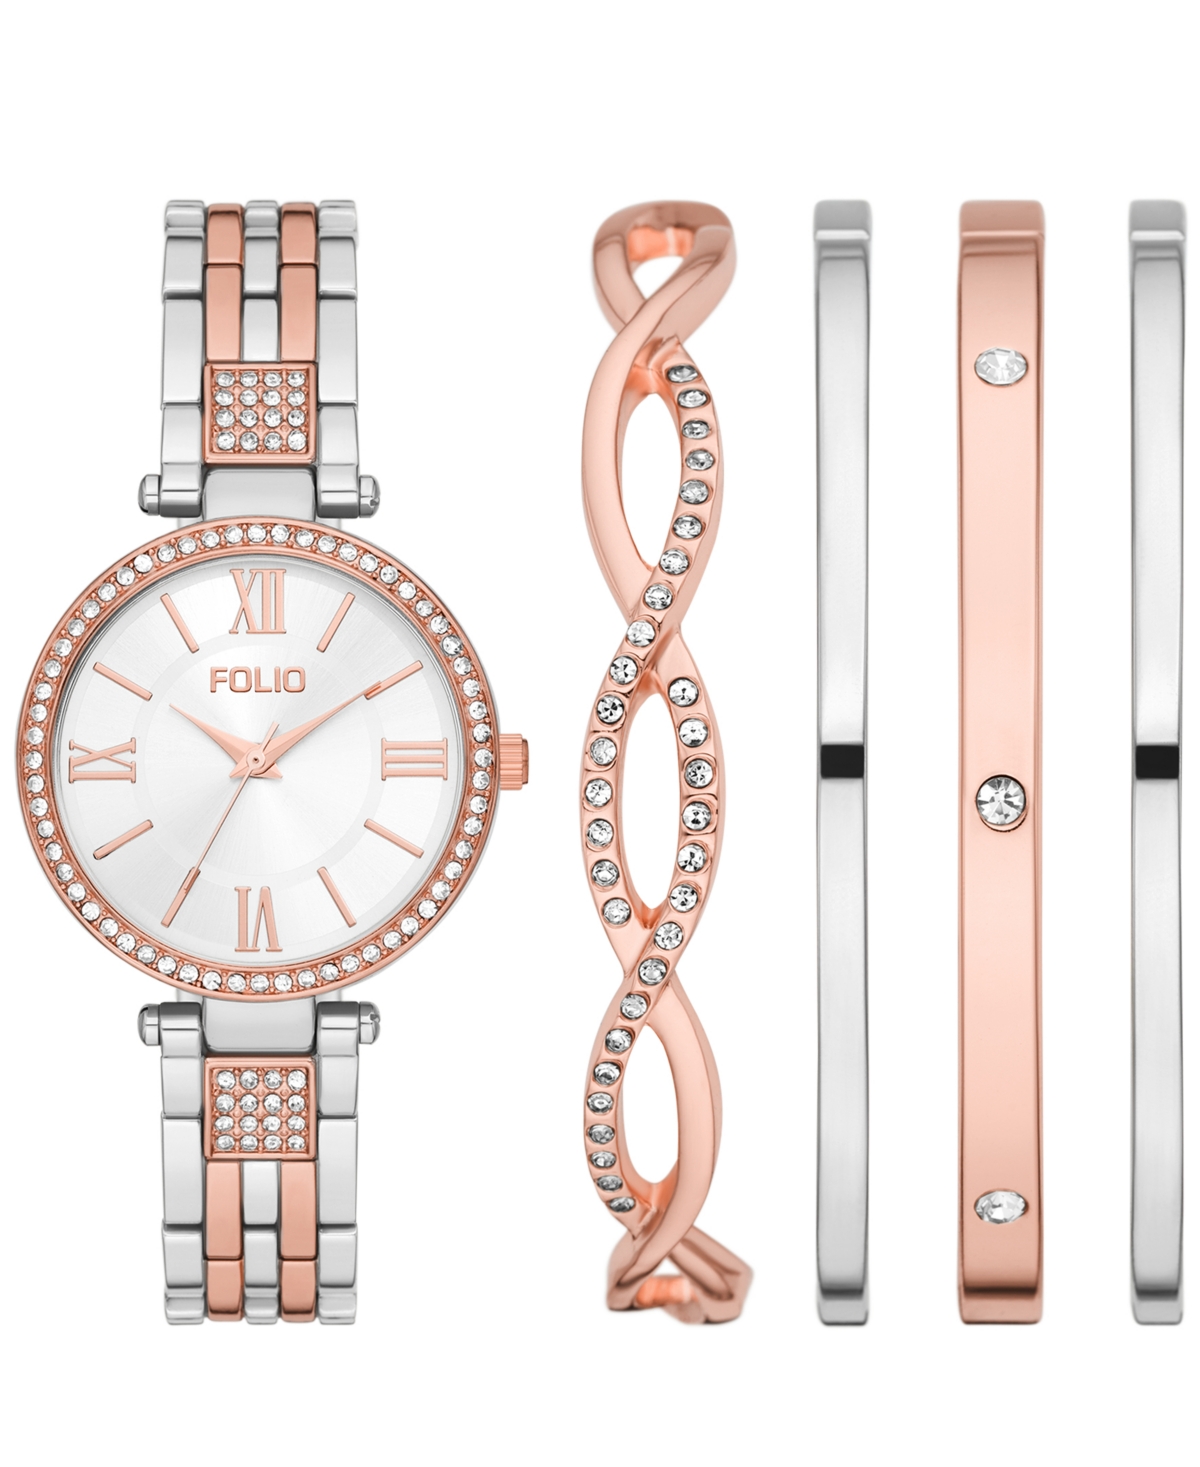 Folio Women's Three Hand Two-Tone 34mm Watch and Bracelet Gift Set, 5 Pieces